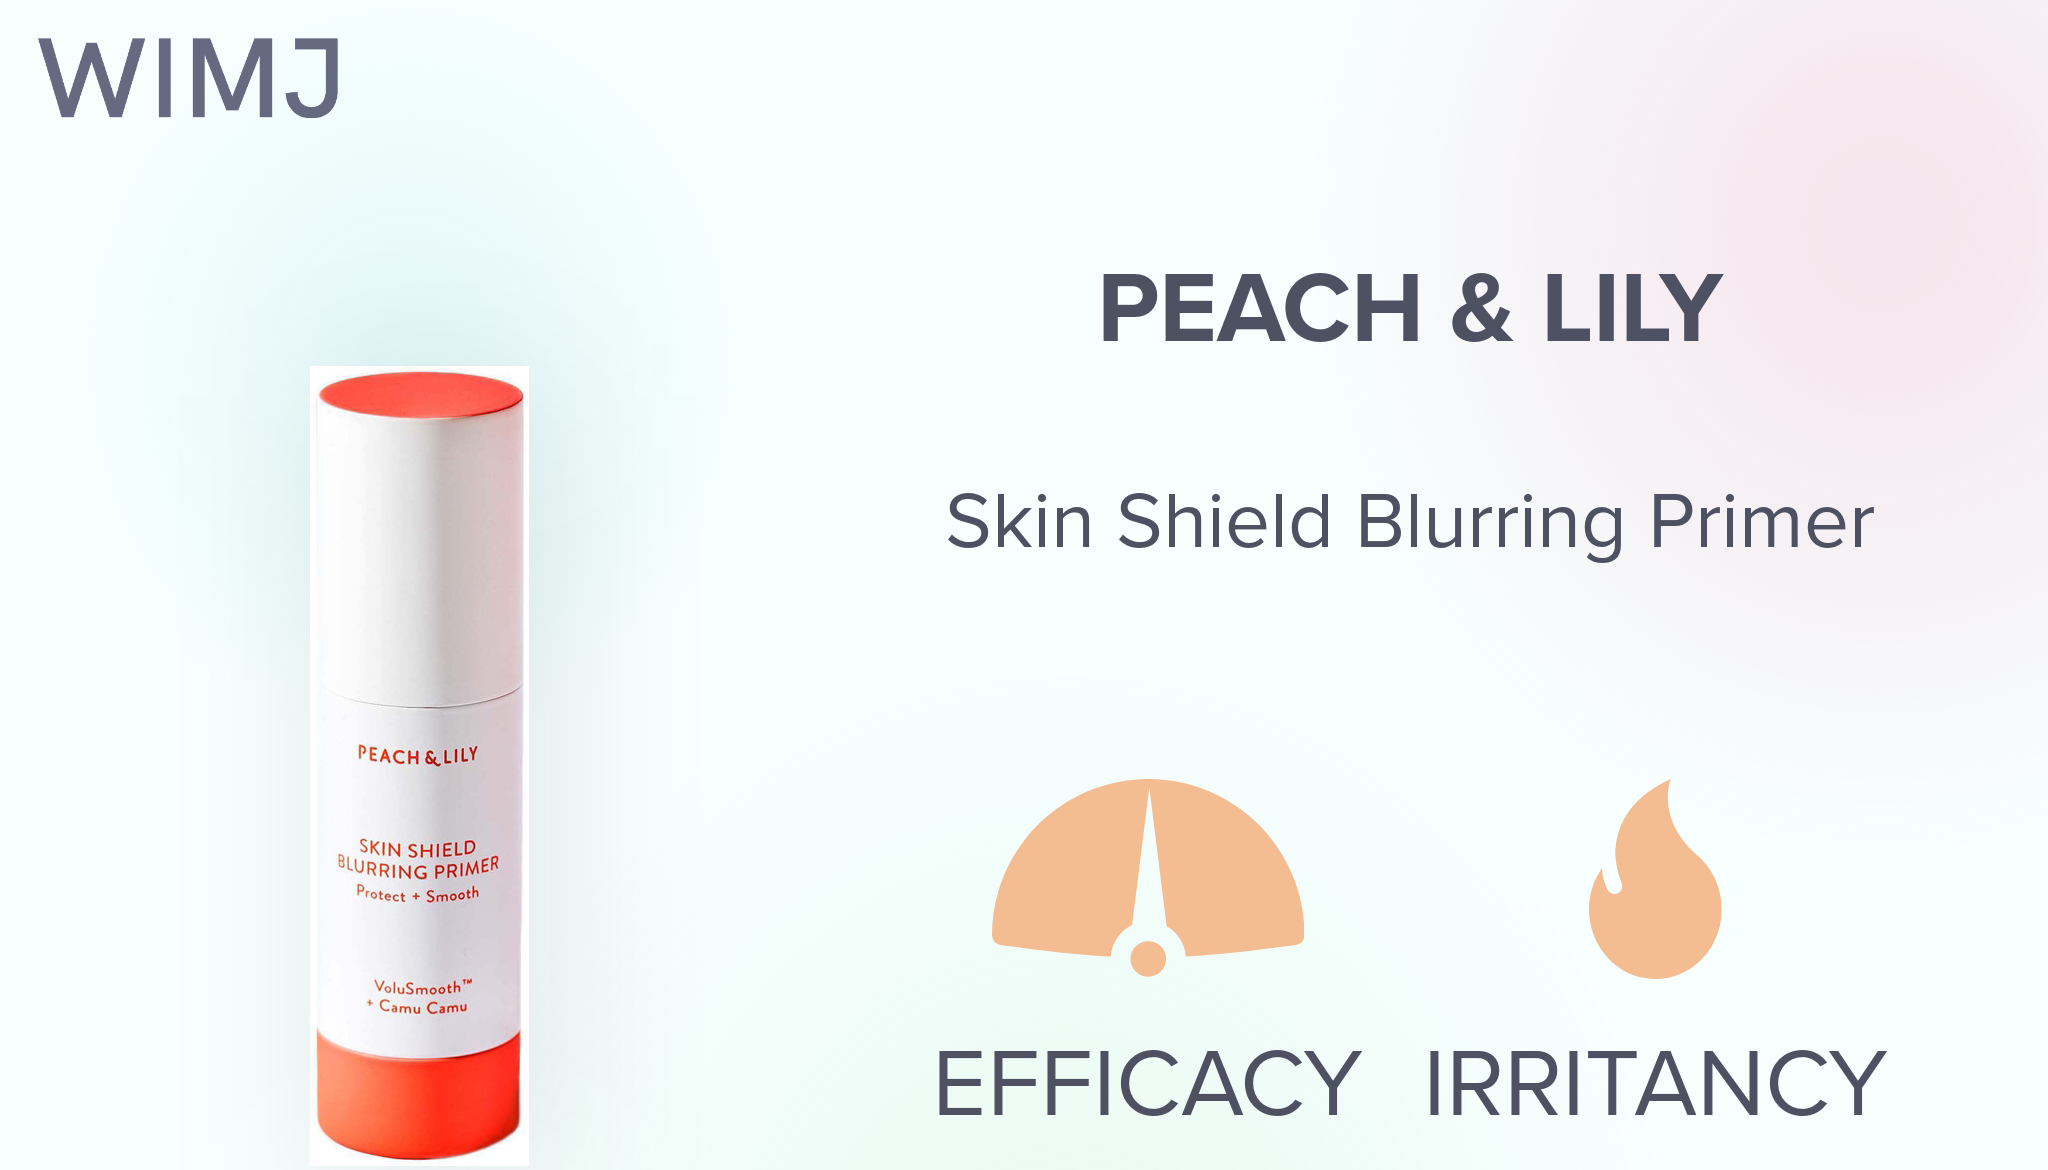 Peach & Lily Skin Shield Blurring Primer, Protect + Smooth, 1 fl oz/30 mL  Ingredients and Reviews